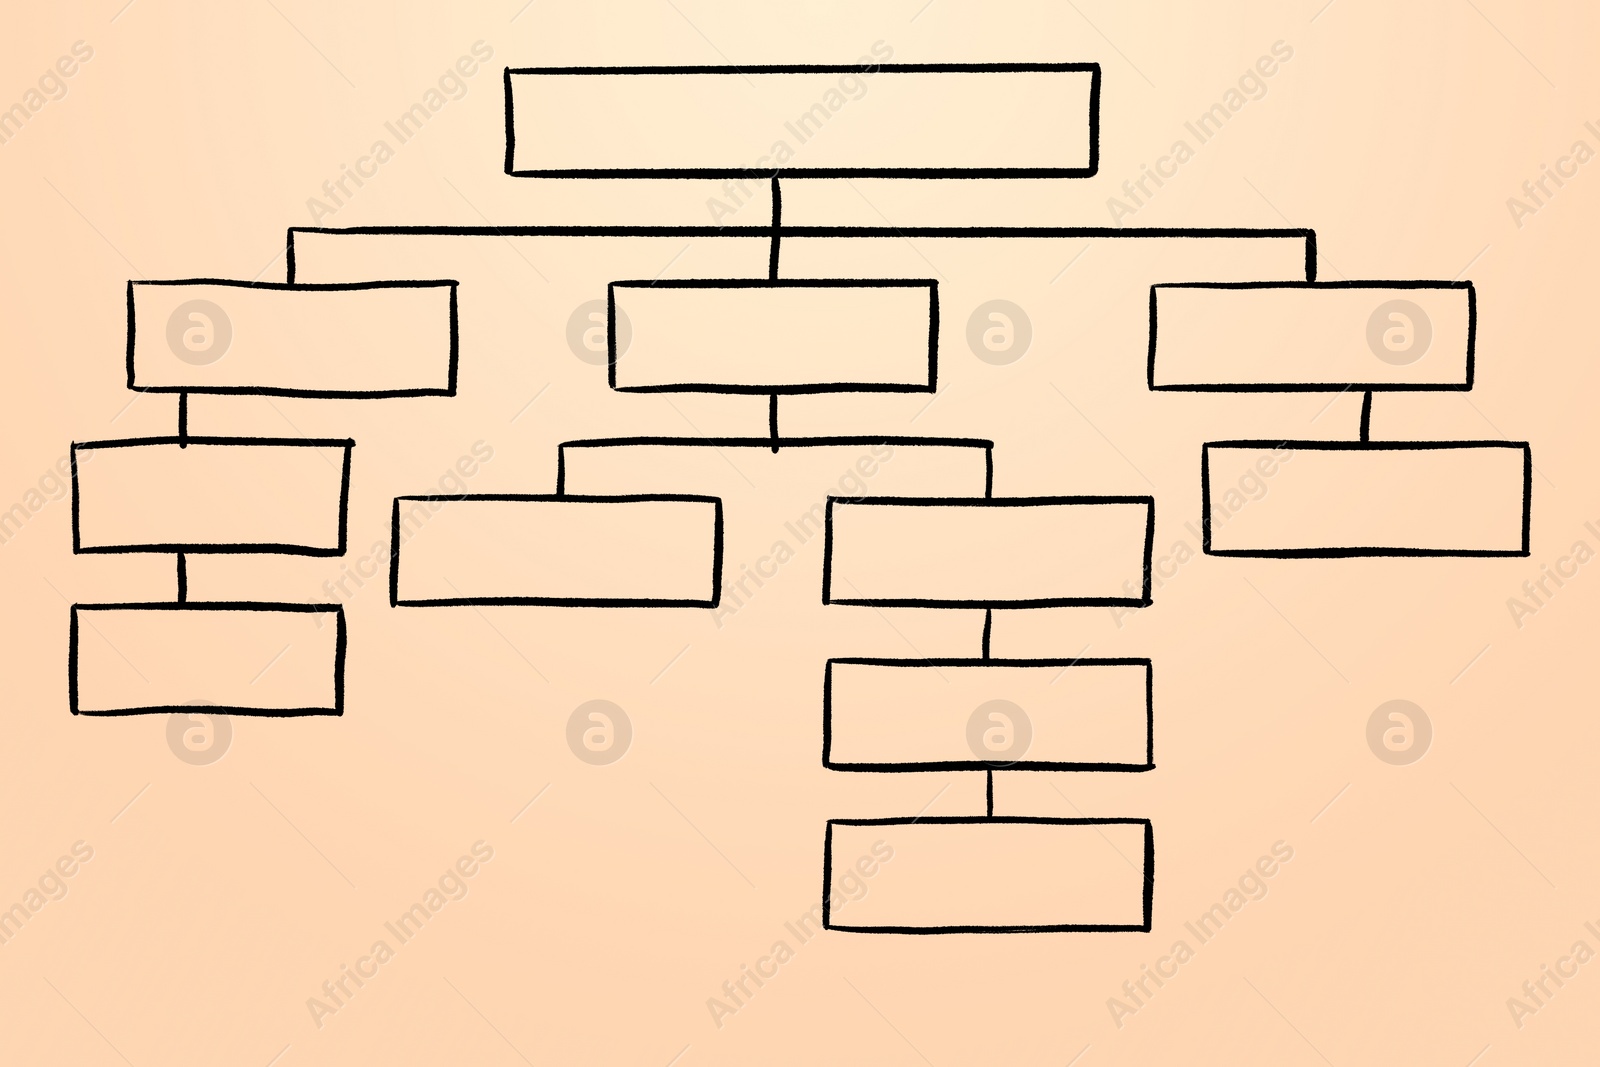 Illustration of Mind map. Diagram with empty blocks on white background